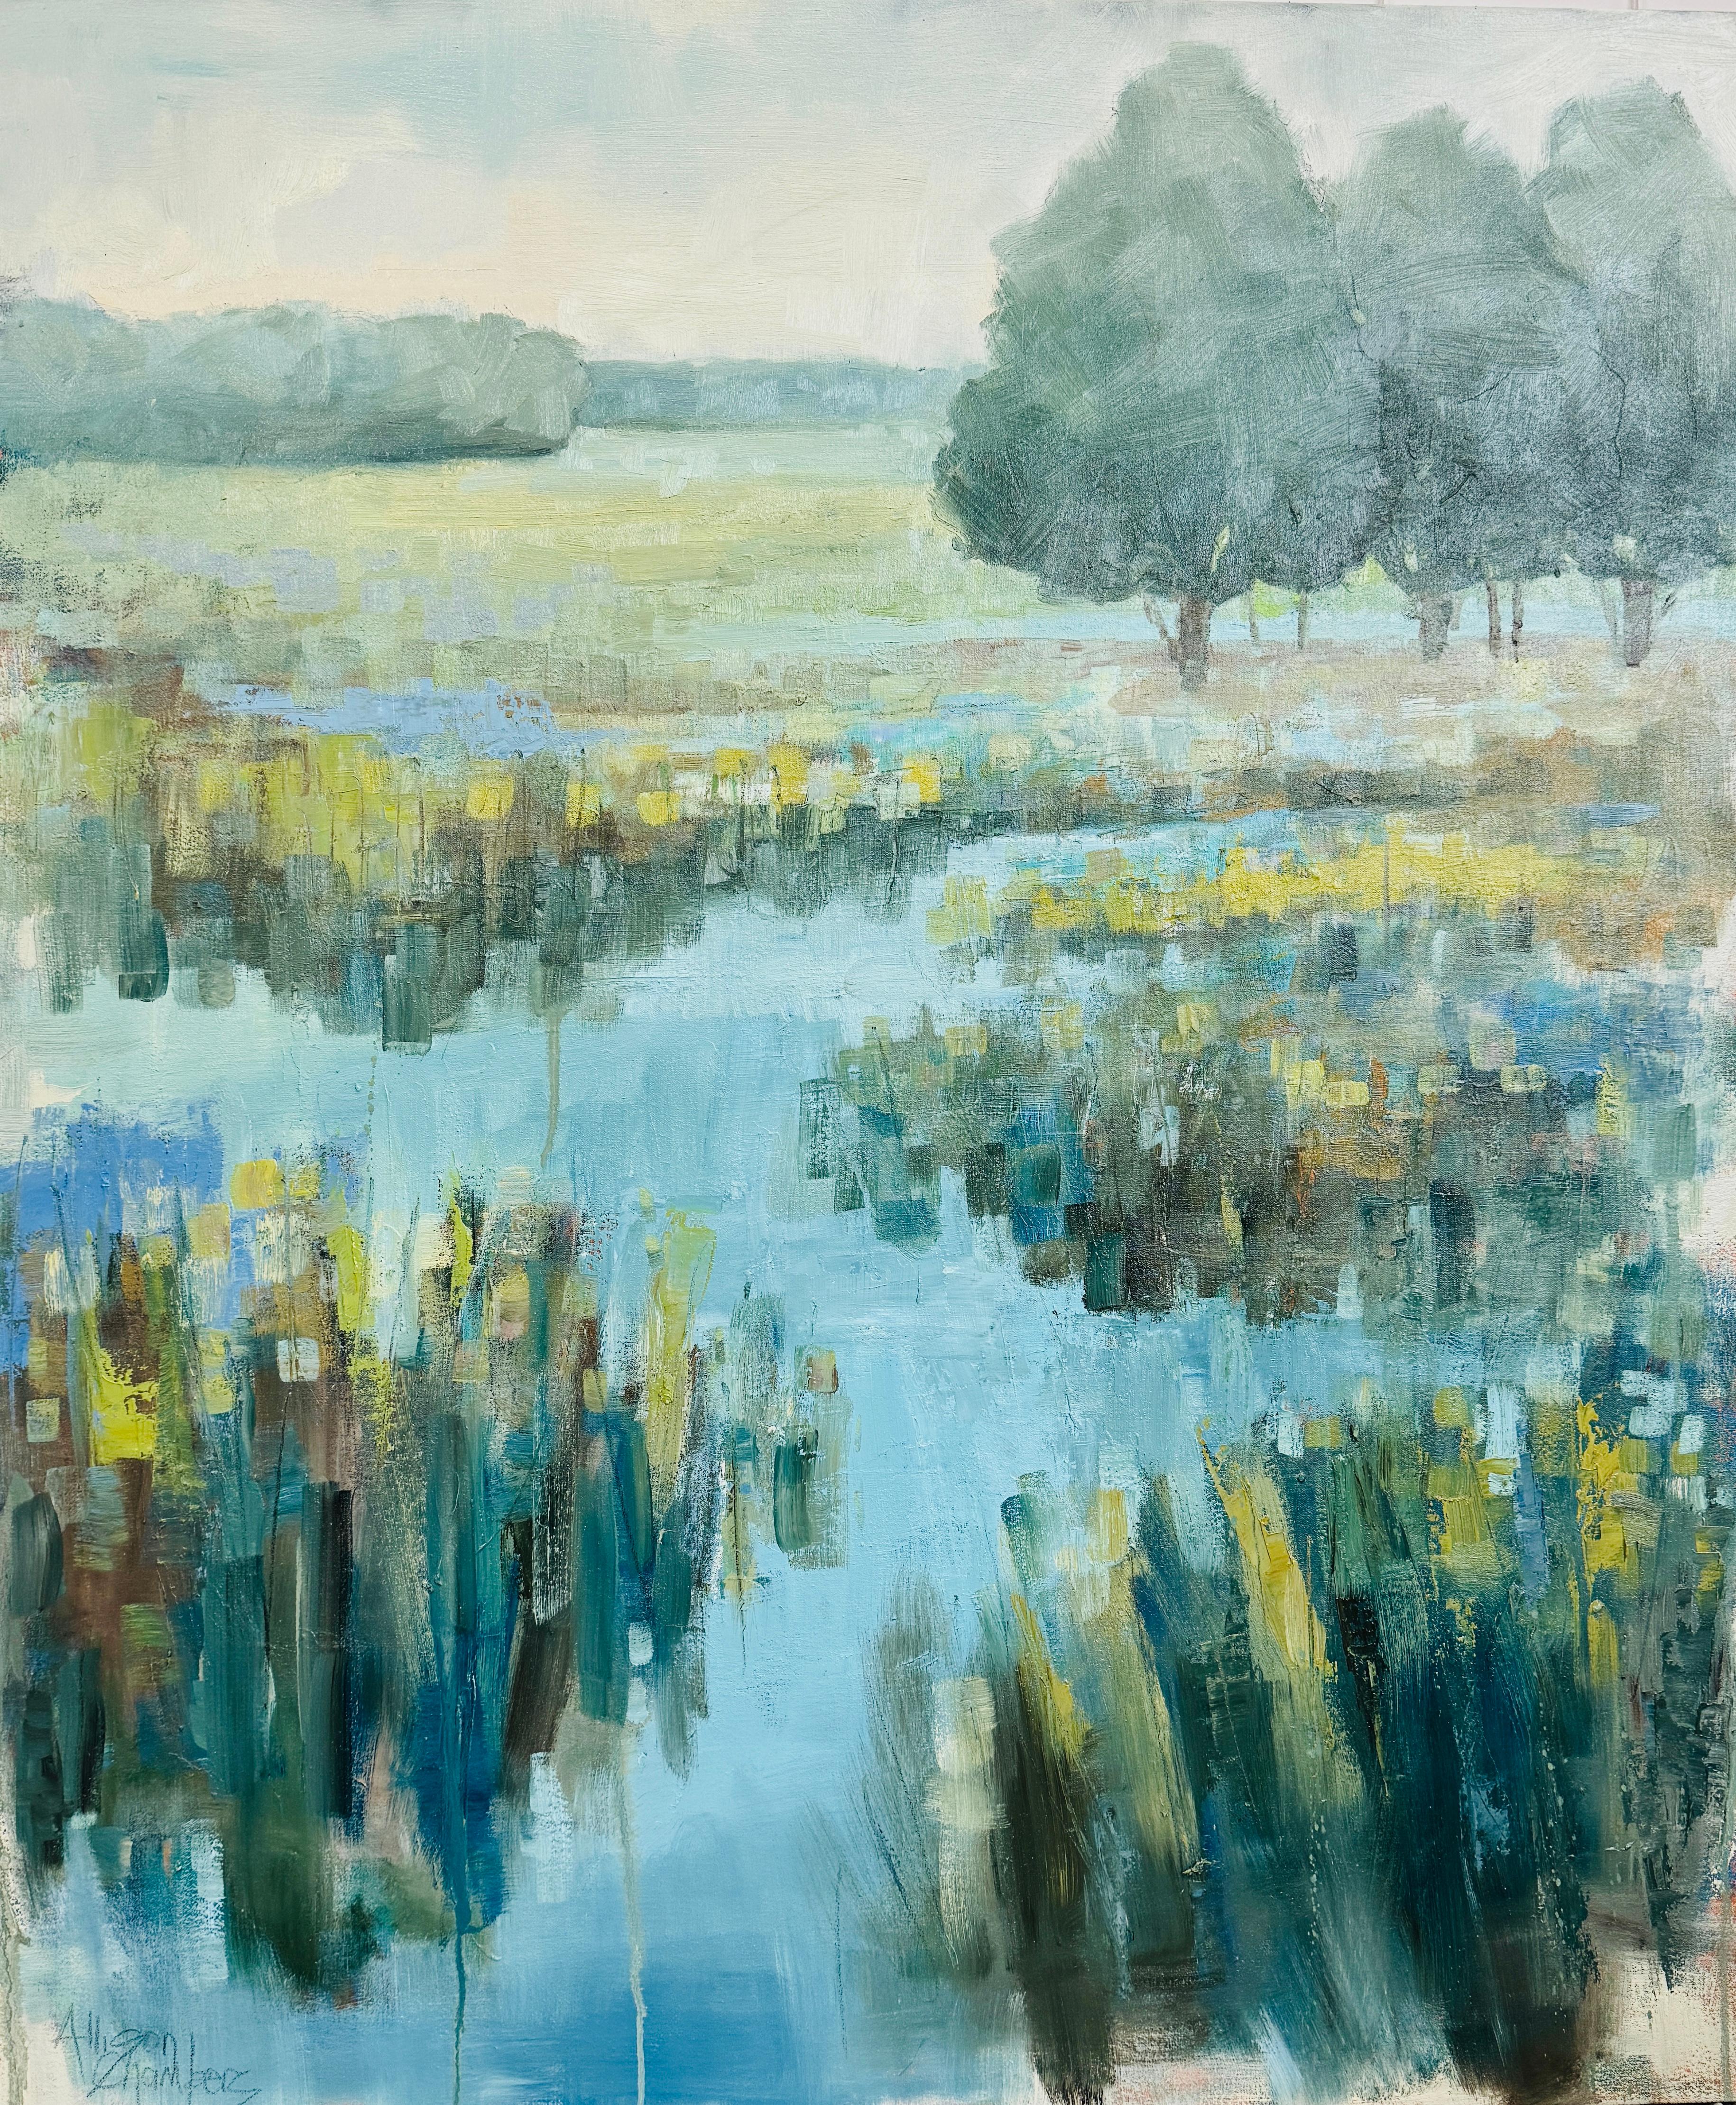 Allison’s softly rendered and beautifully painted landscapes and waterscapes capture light, depth and the constantly shifting movement of water, flora and fauna.

Her impasto technique incorporates the texture that only comes from the liberal use of